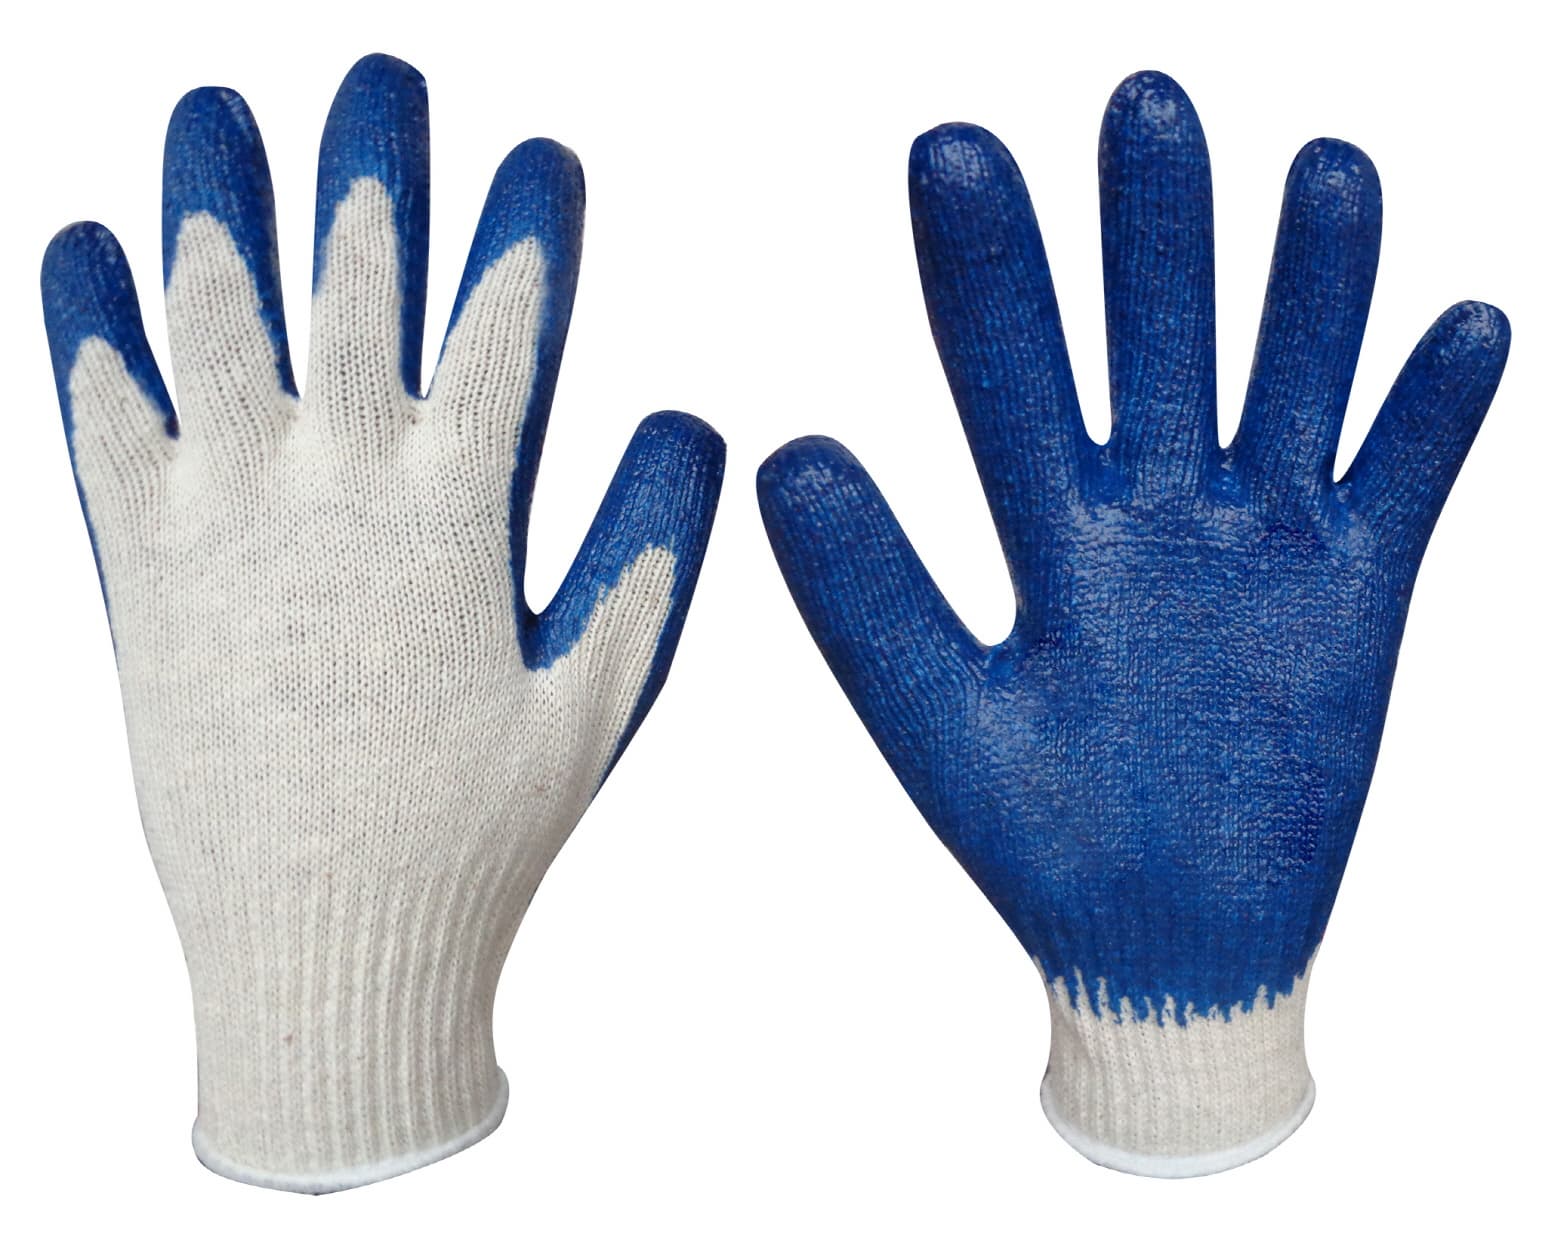 HLCG10_10G T_C_70_30_ with natural Latex coating gloves